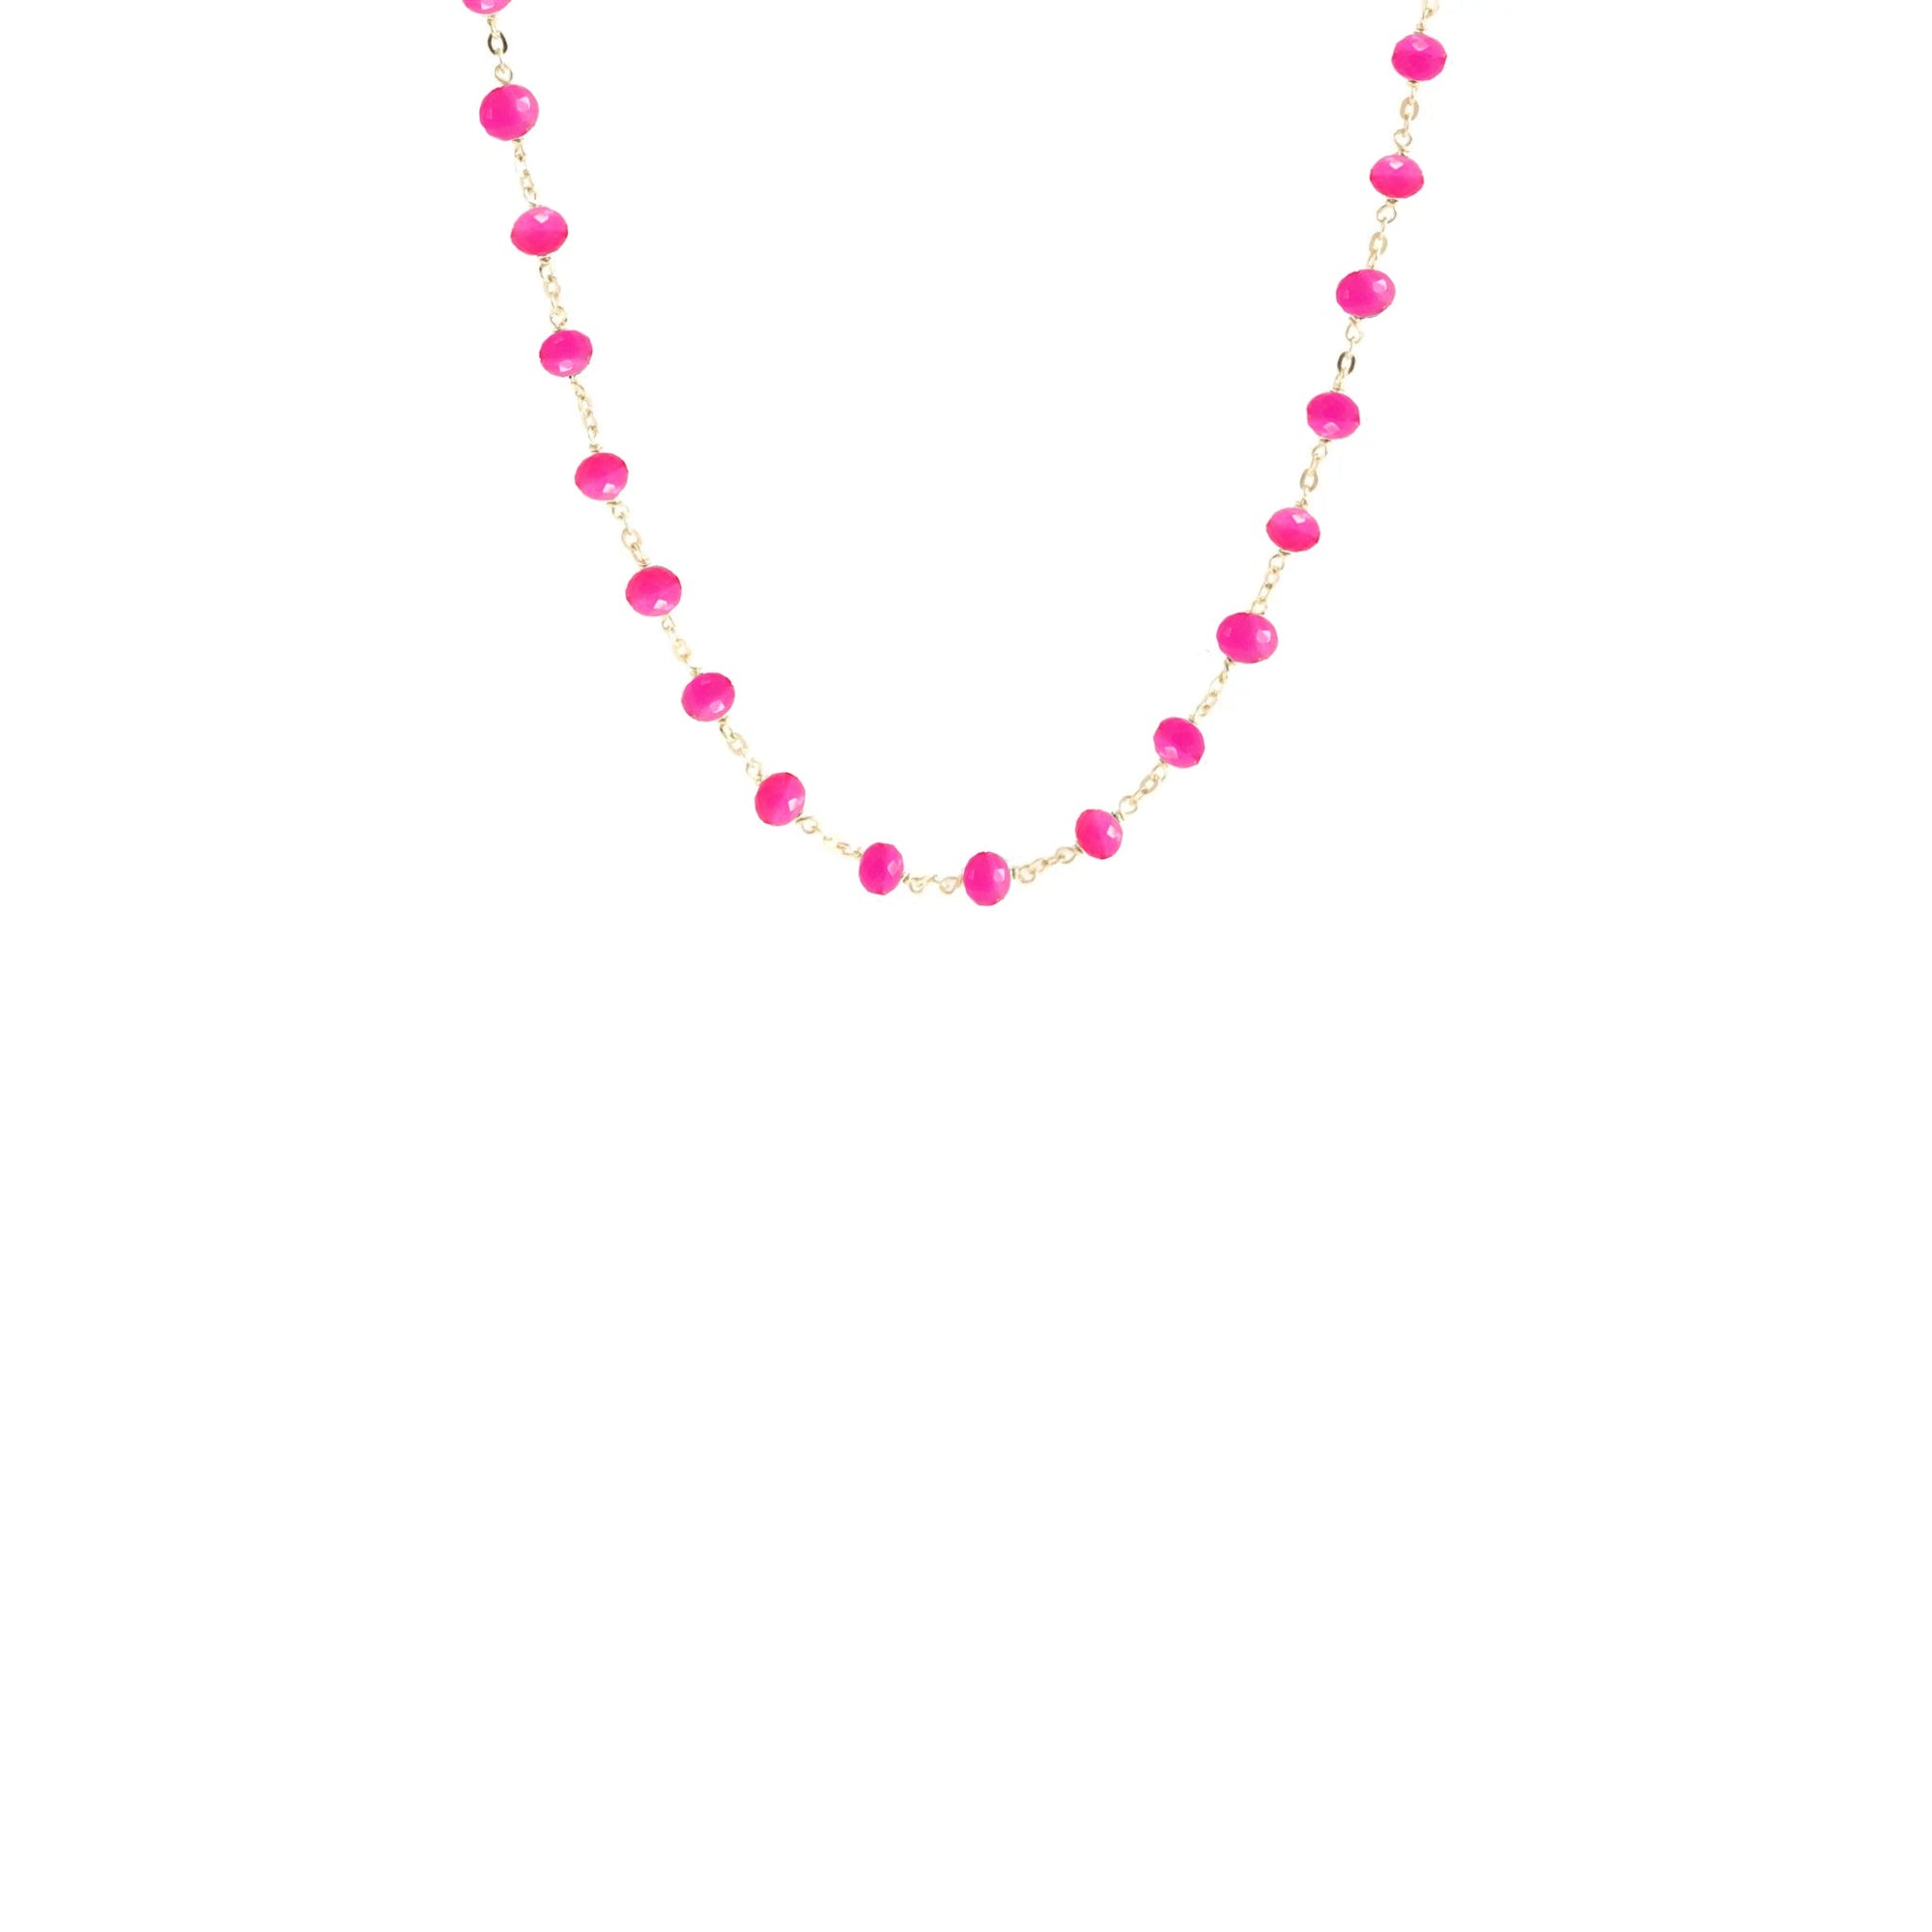 ICONIC SHORT BEADED NECKLACE - HOT PINK CHALCEDONY & GOLD 16-20" - SO PRETTY CARA COTTER